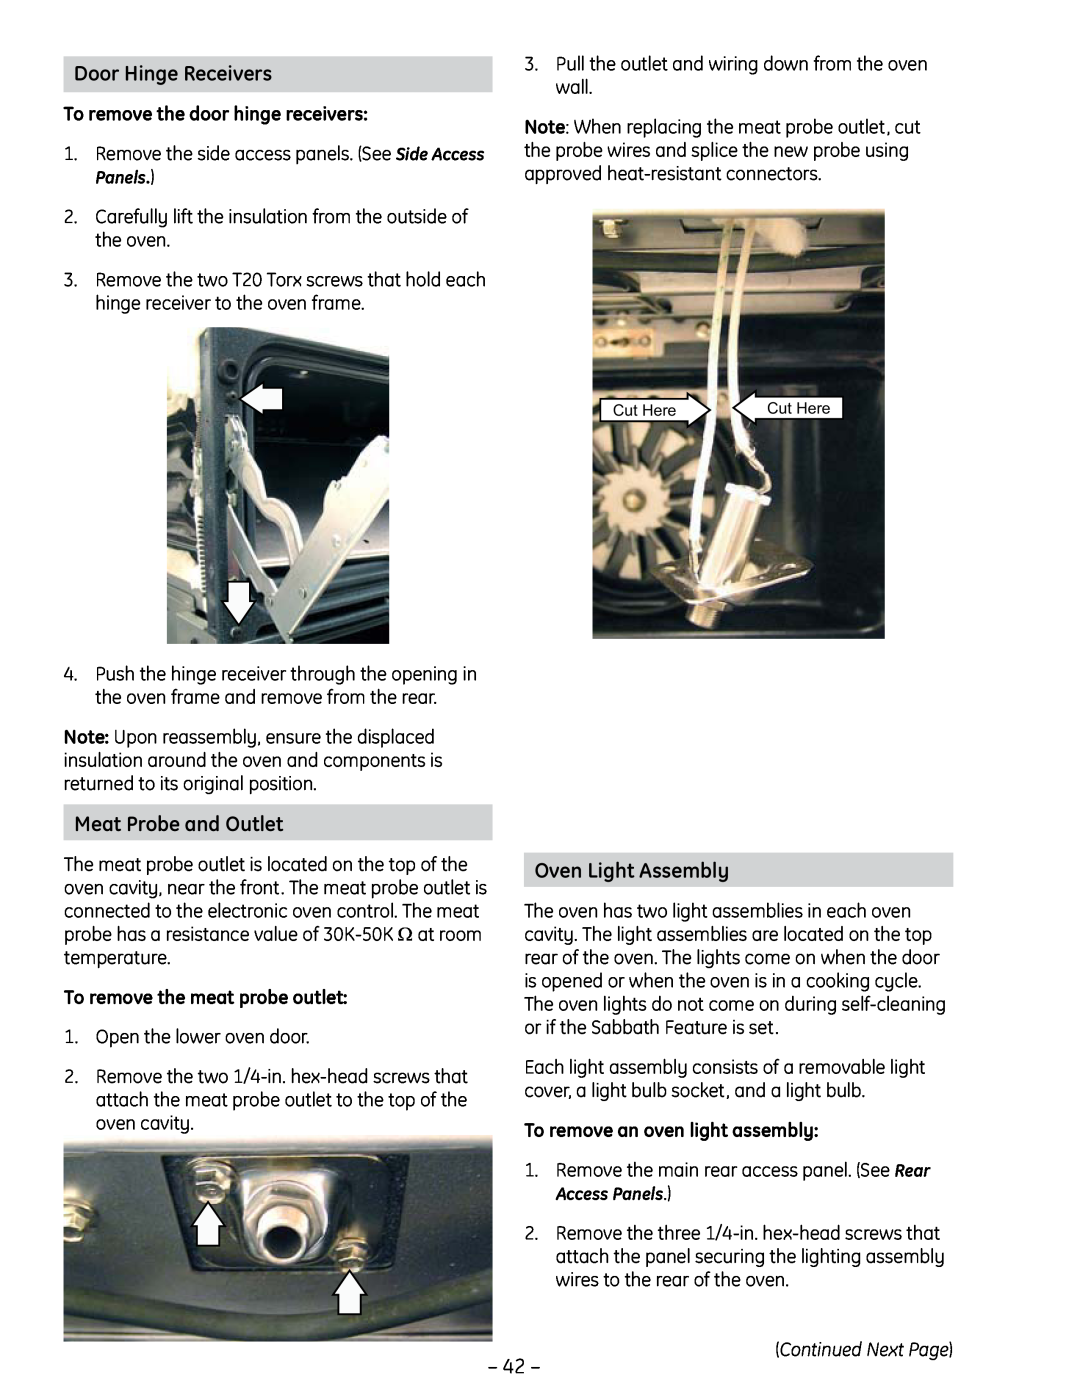 GE PT925 manual Door Hinge Receivers, Meat Probe and Outlet, Oven Light Assembly, To remove the door hinge receivers 